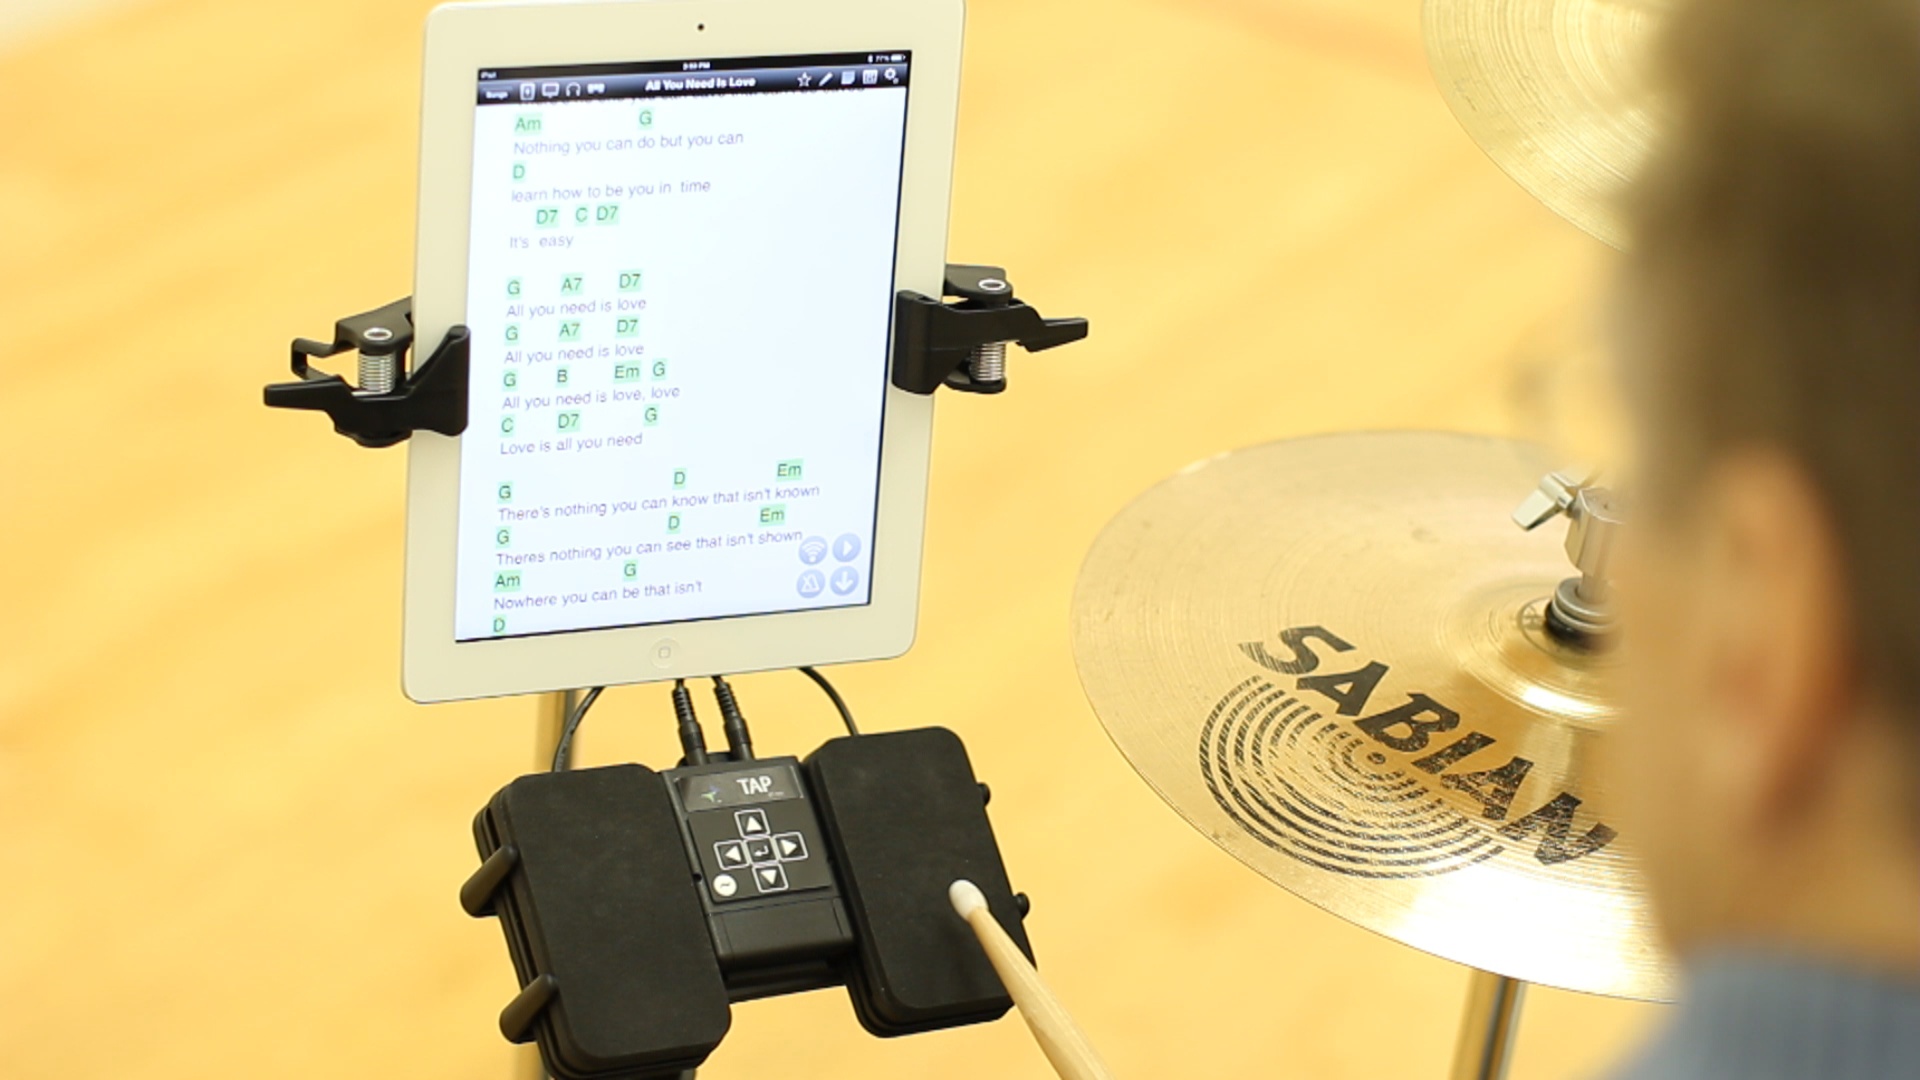 Turn digital sheet music pages with the TAP